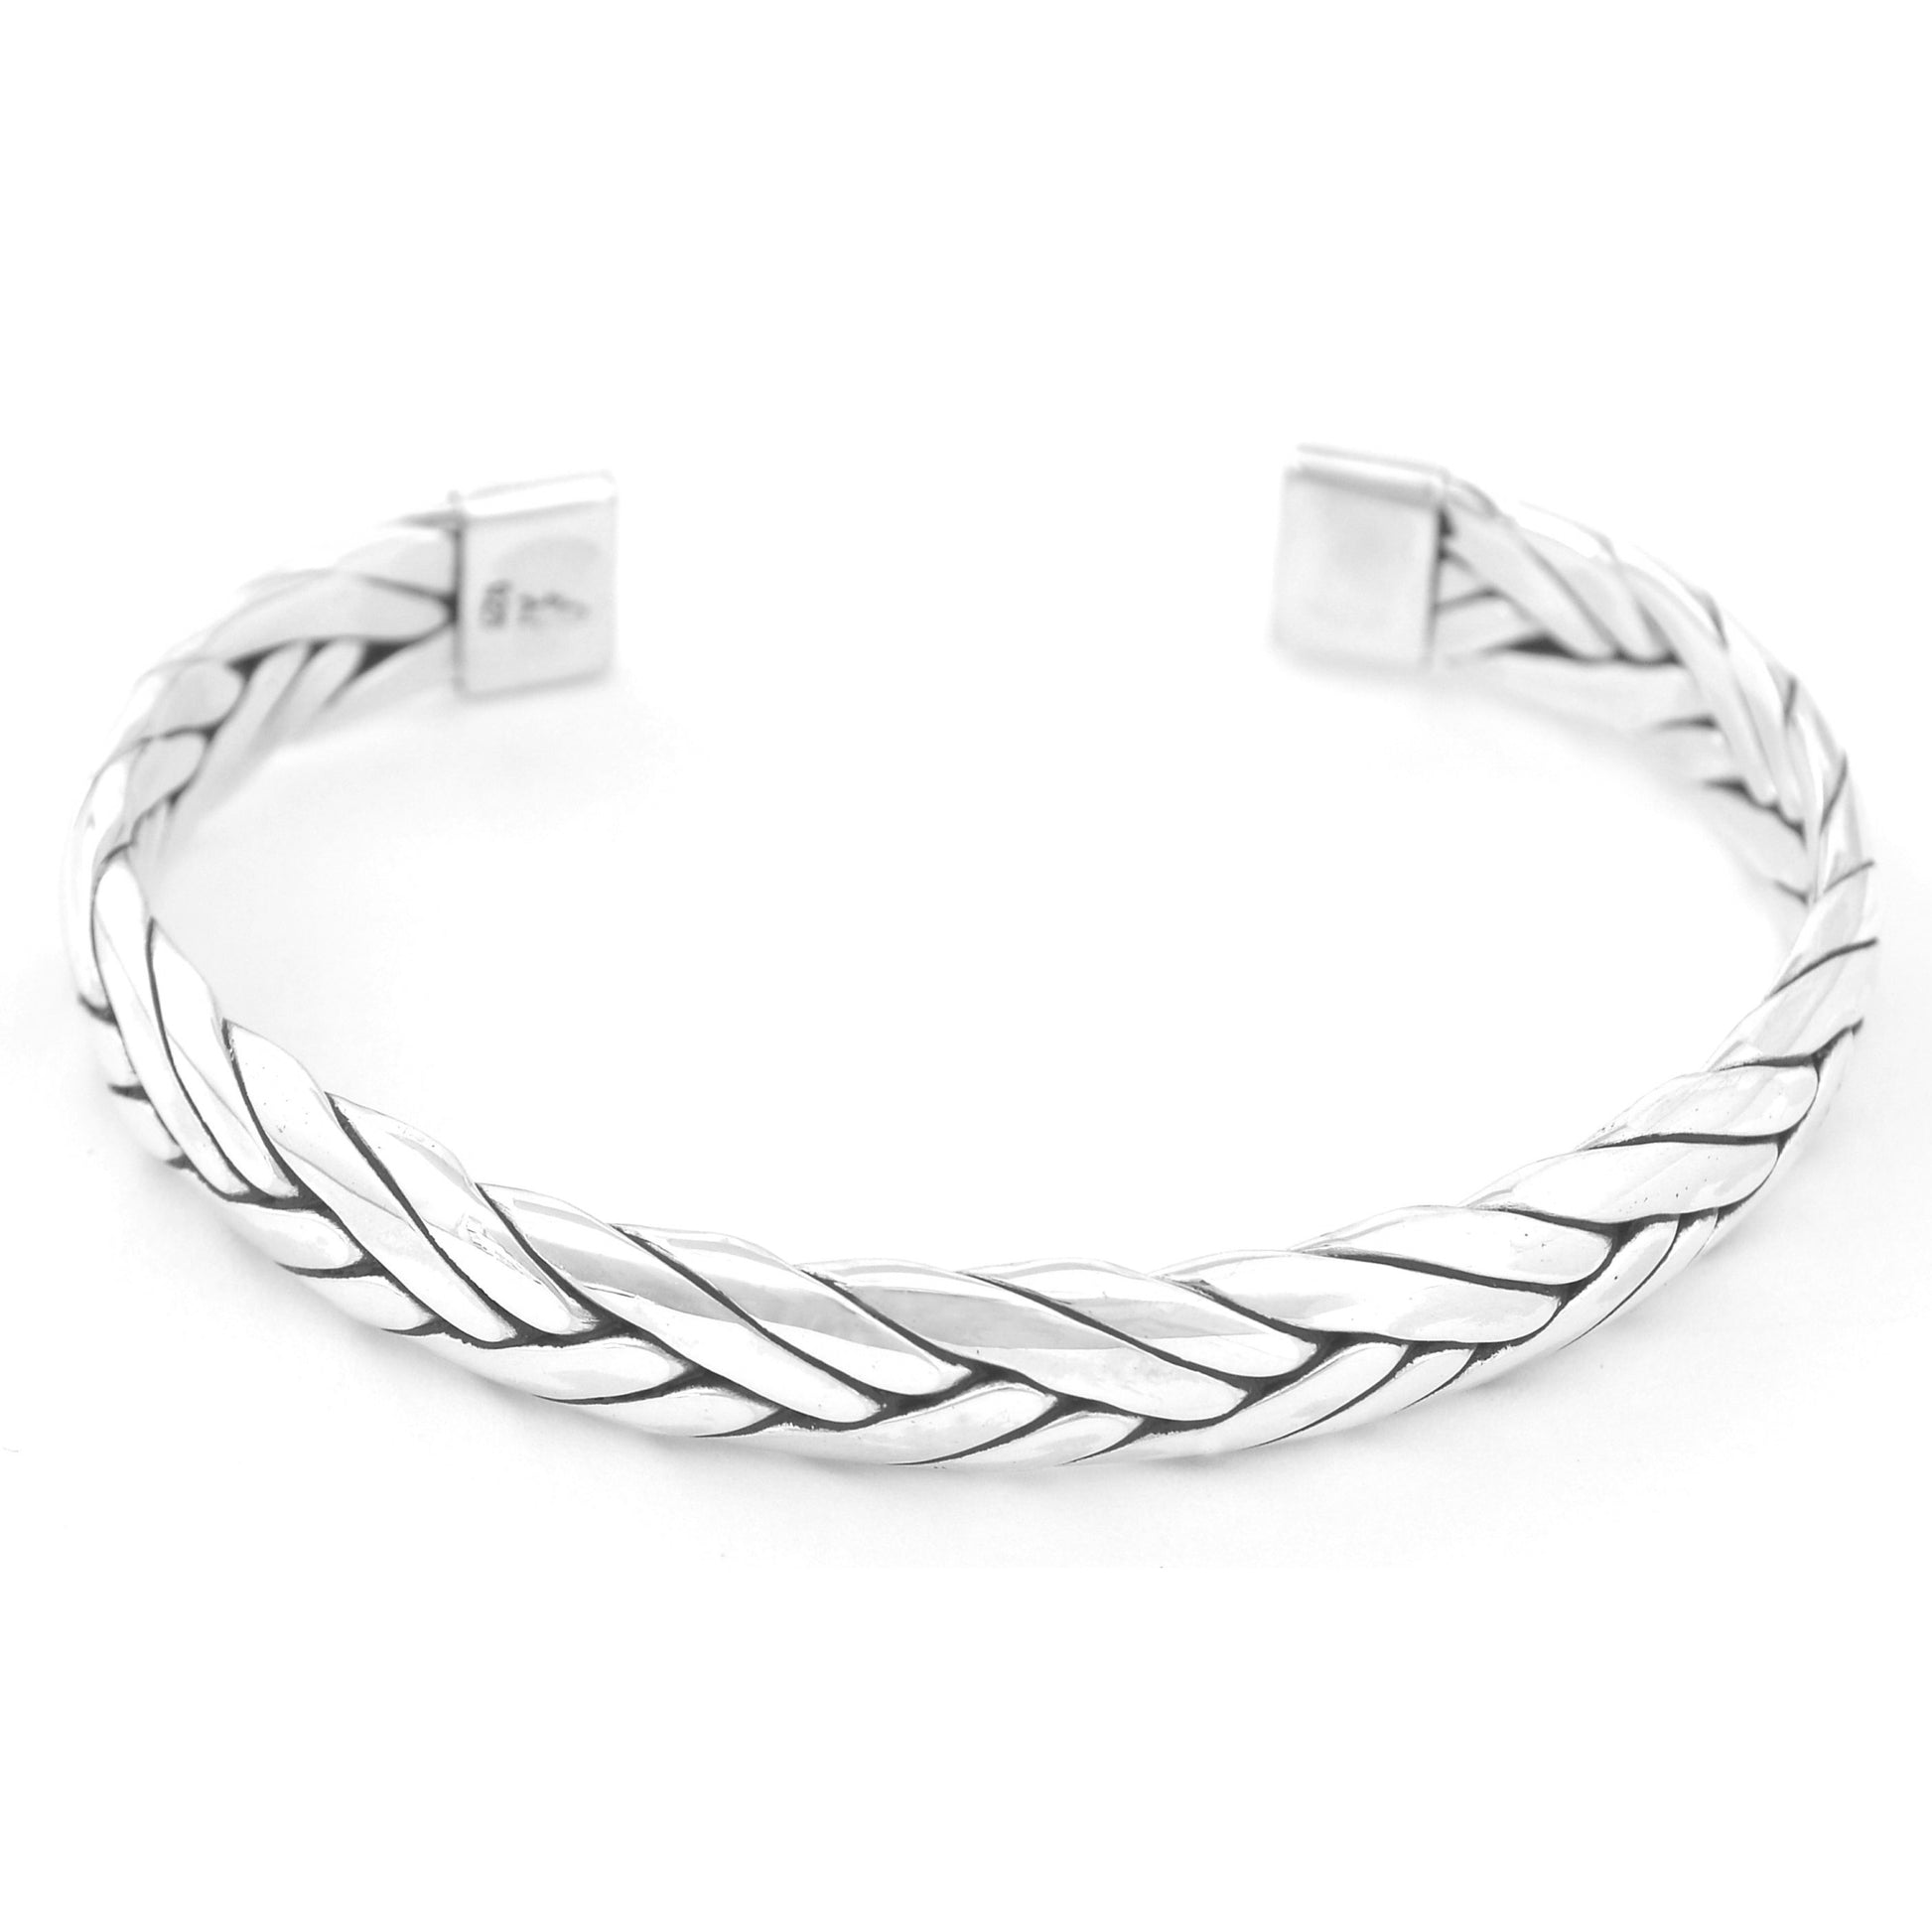 Wide silver cuff bracelet made of braided flat sterling strips.